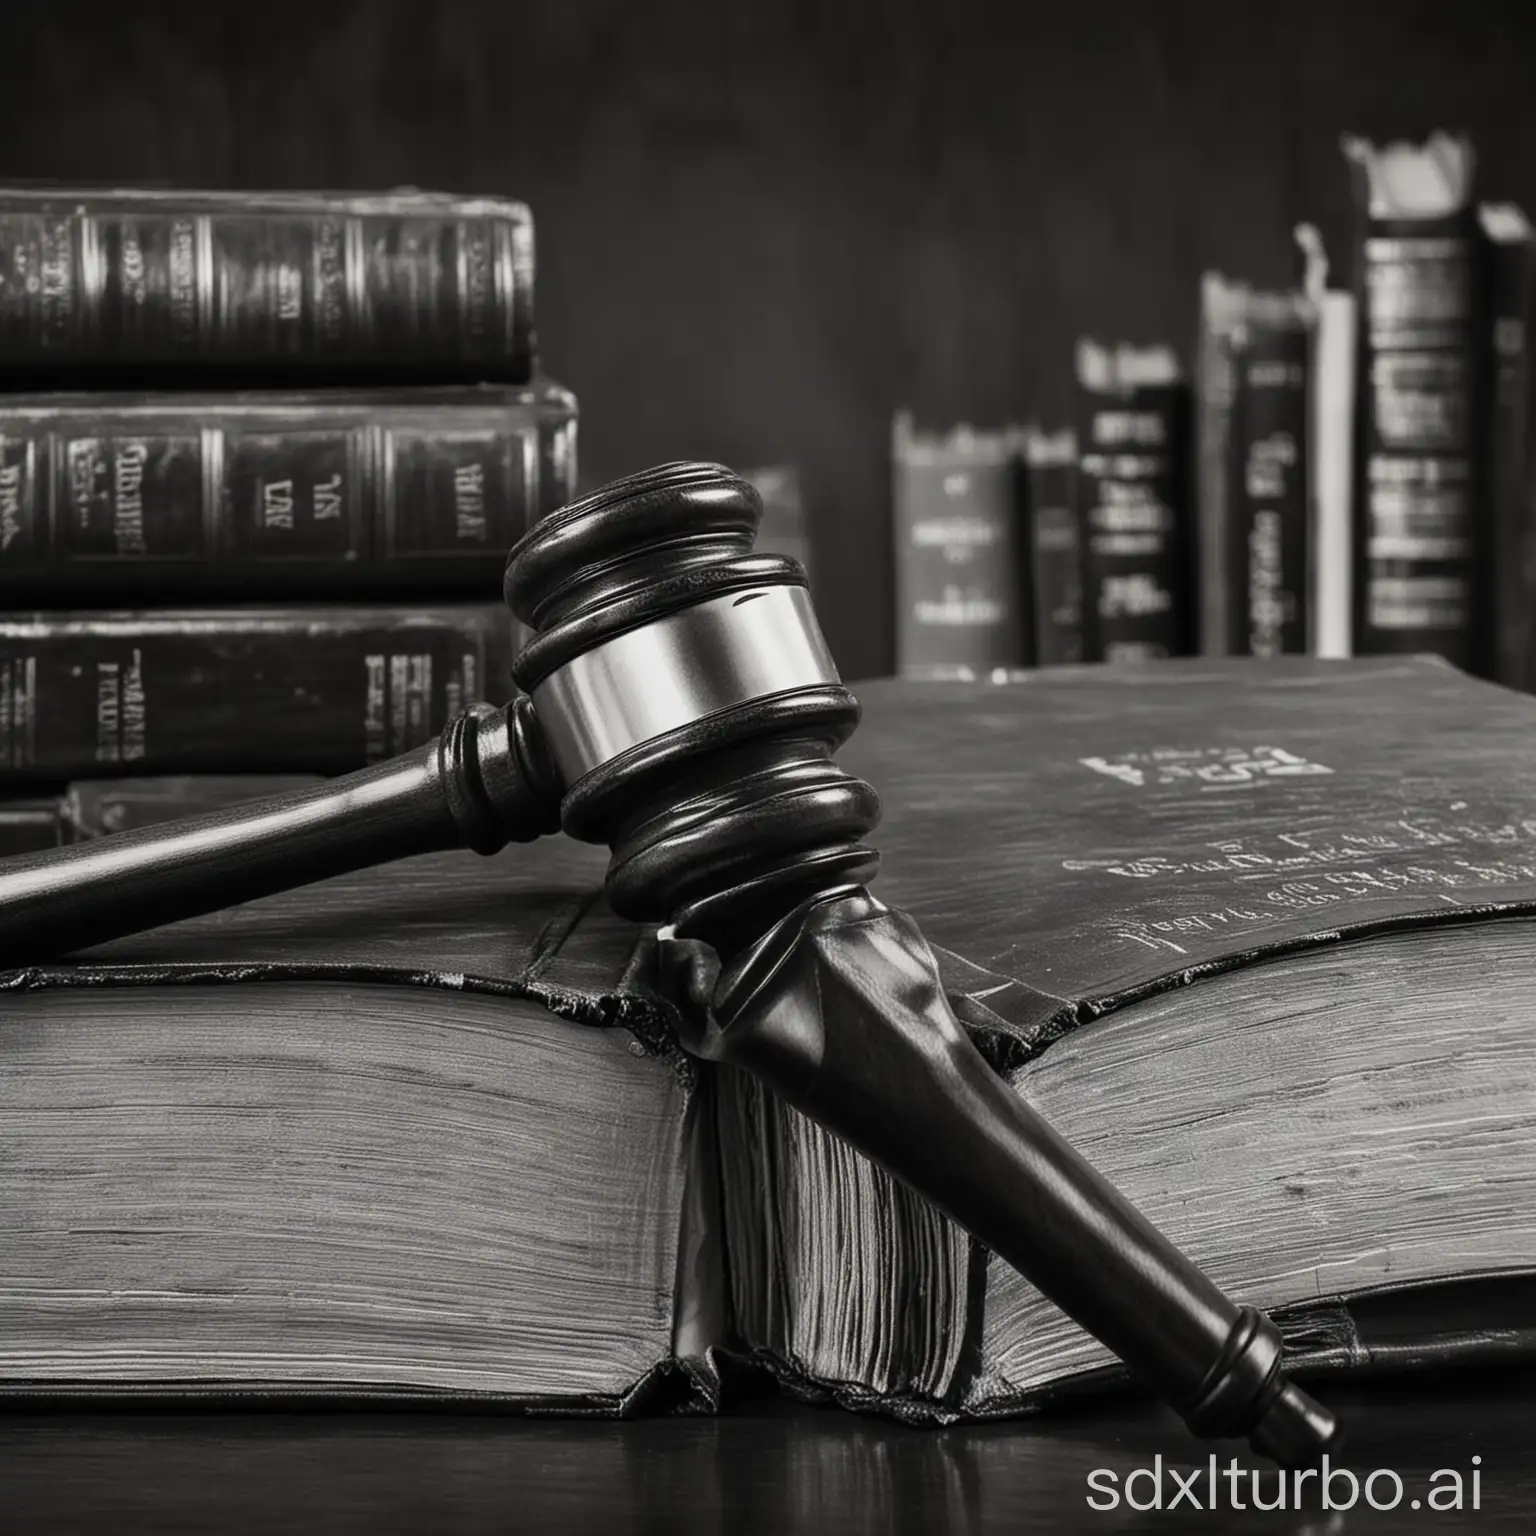 A close-up of a gavel and a stack of law books. The gavel is resting on the books, and the books are open to a page with legal text. The image is in black and white, and it has a serious and professional feel.